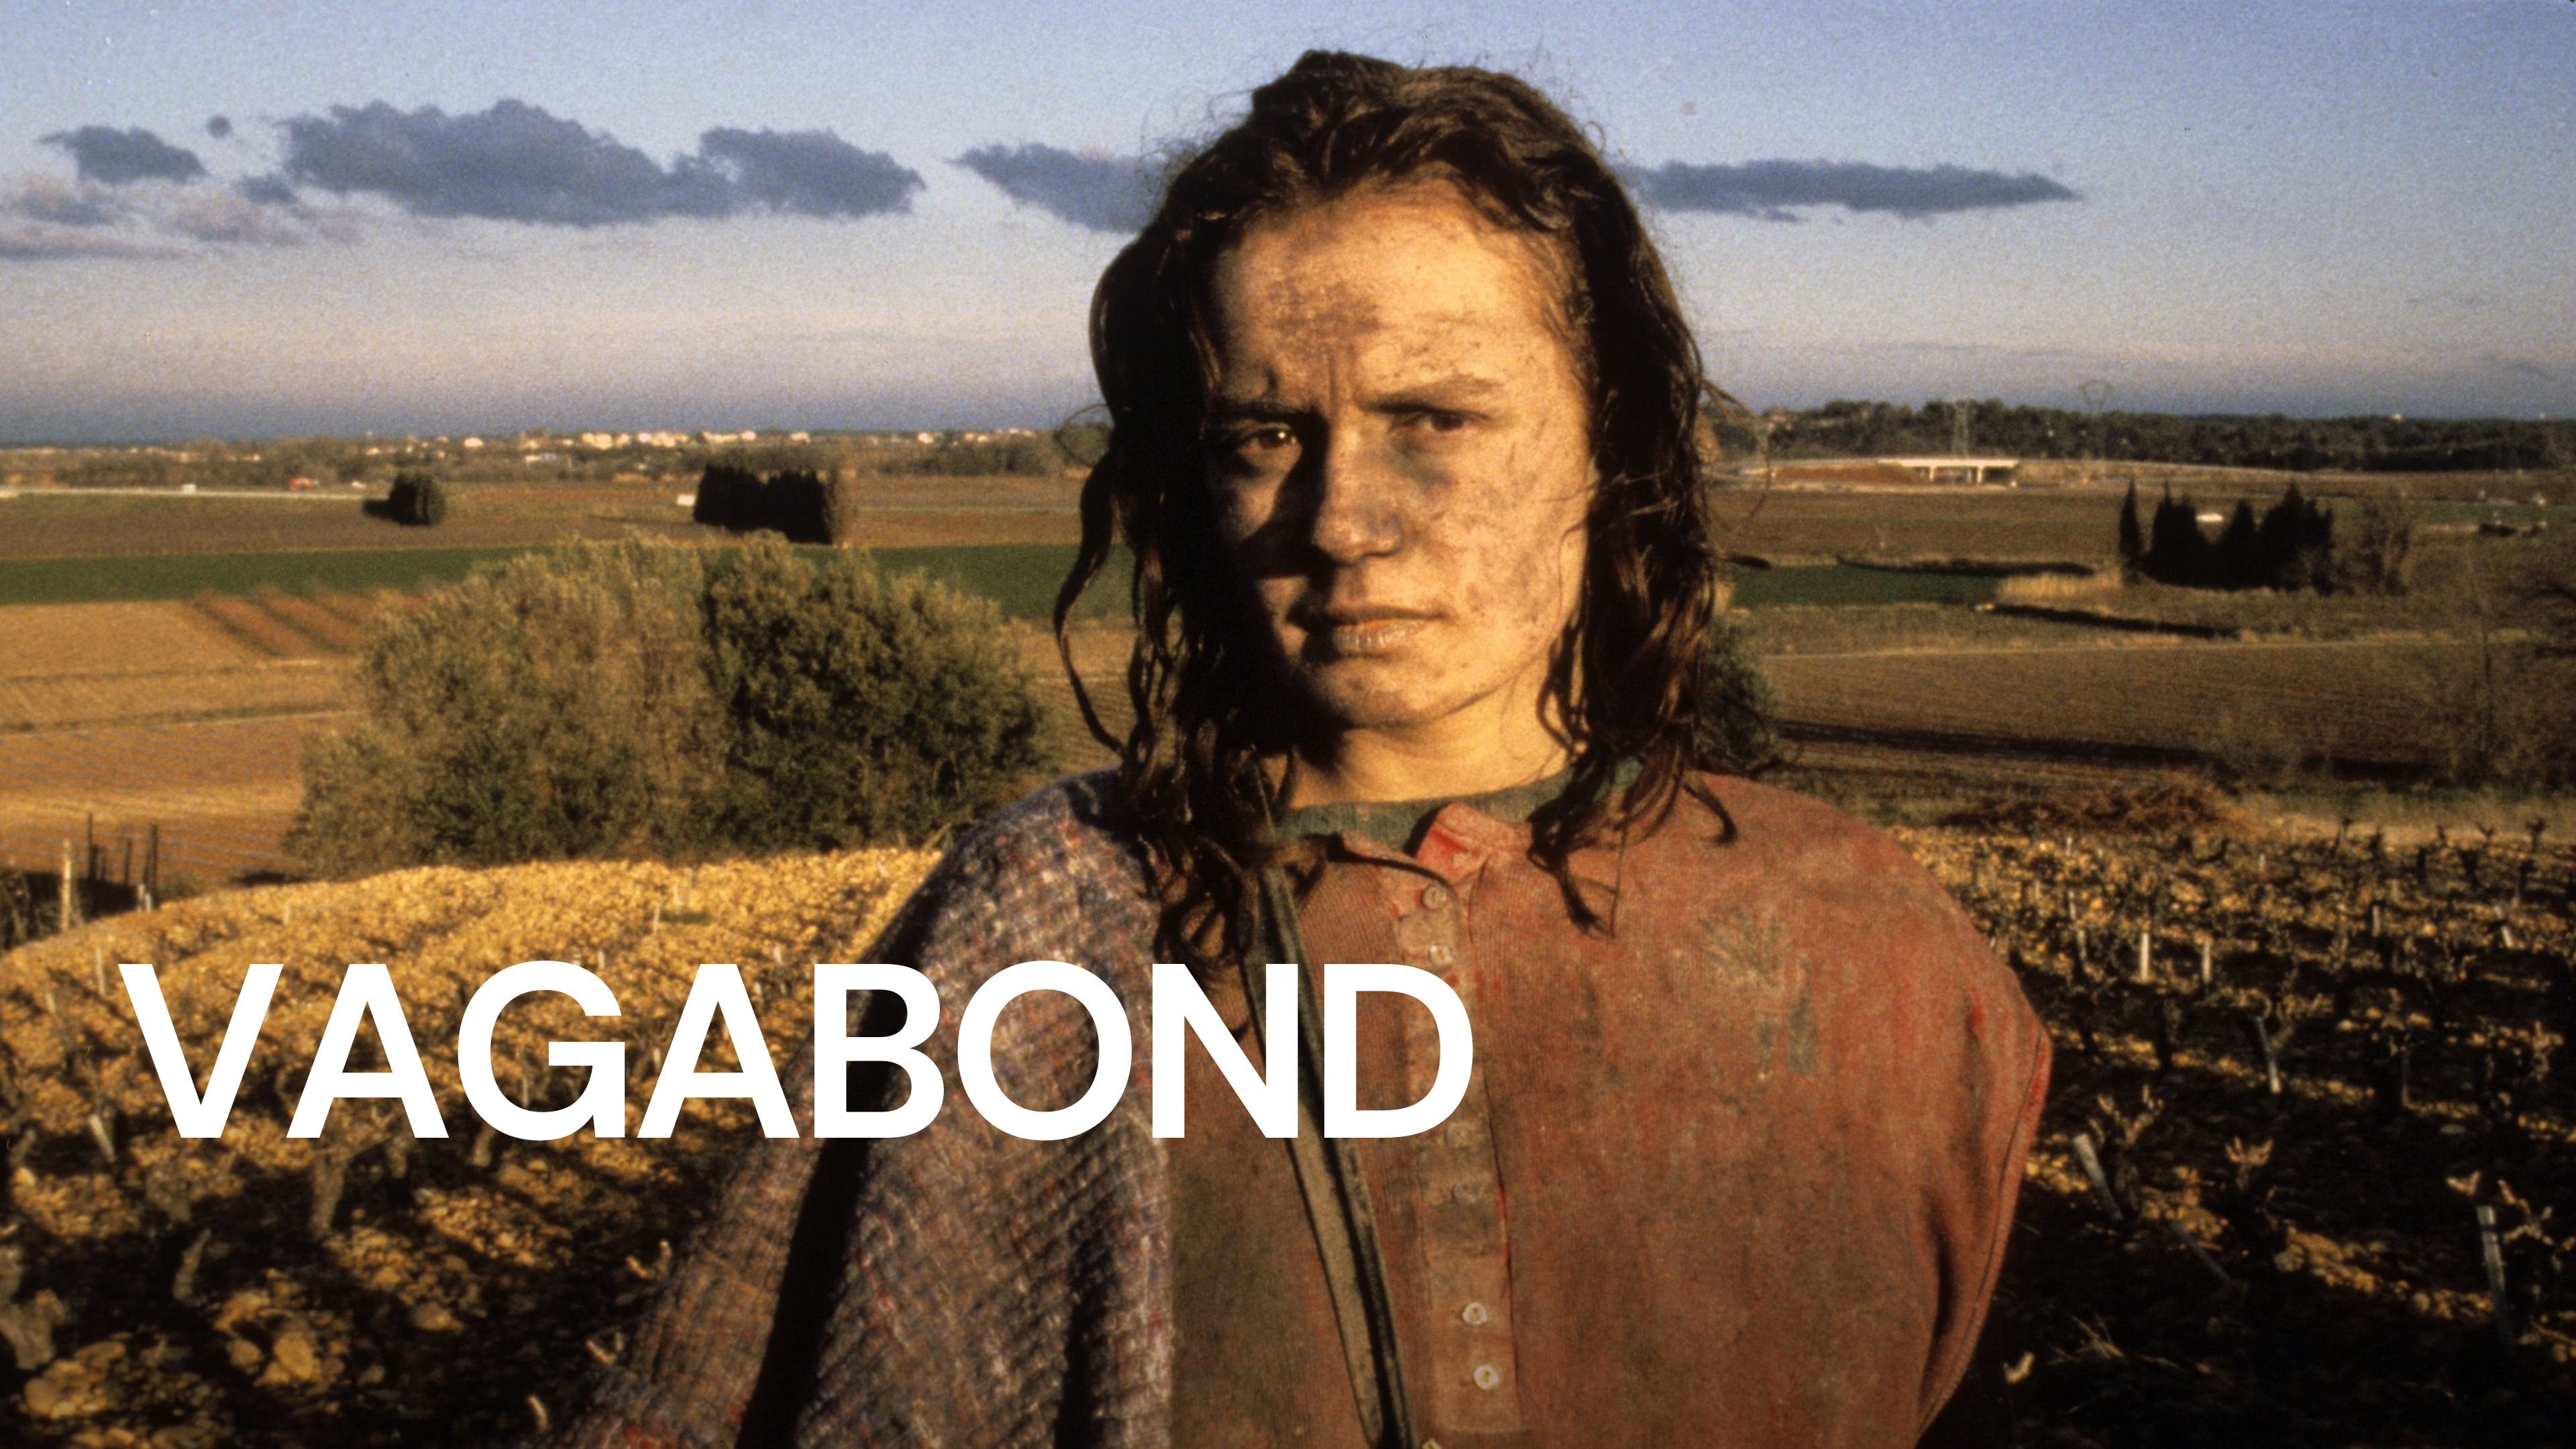 45 Facts about the movie Vagabond - Facts.net